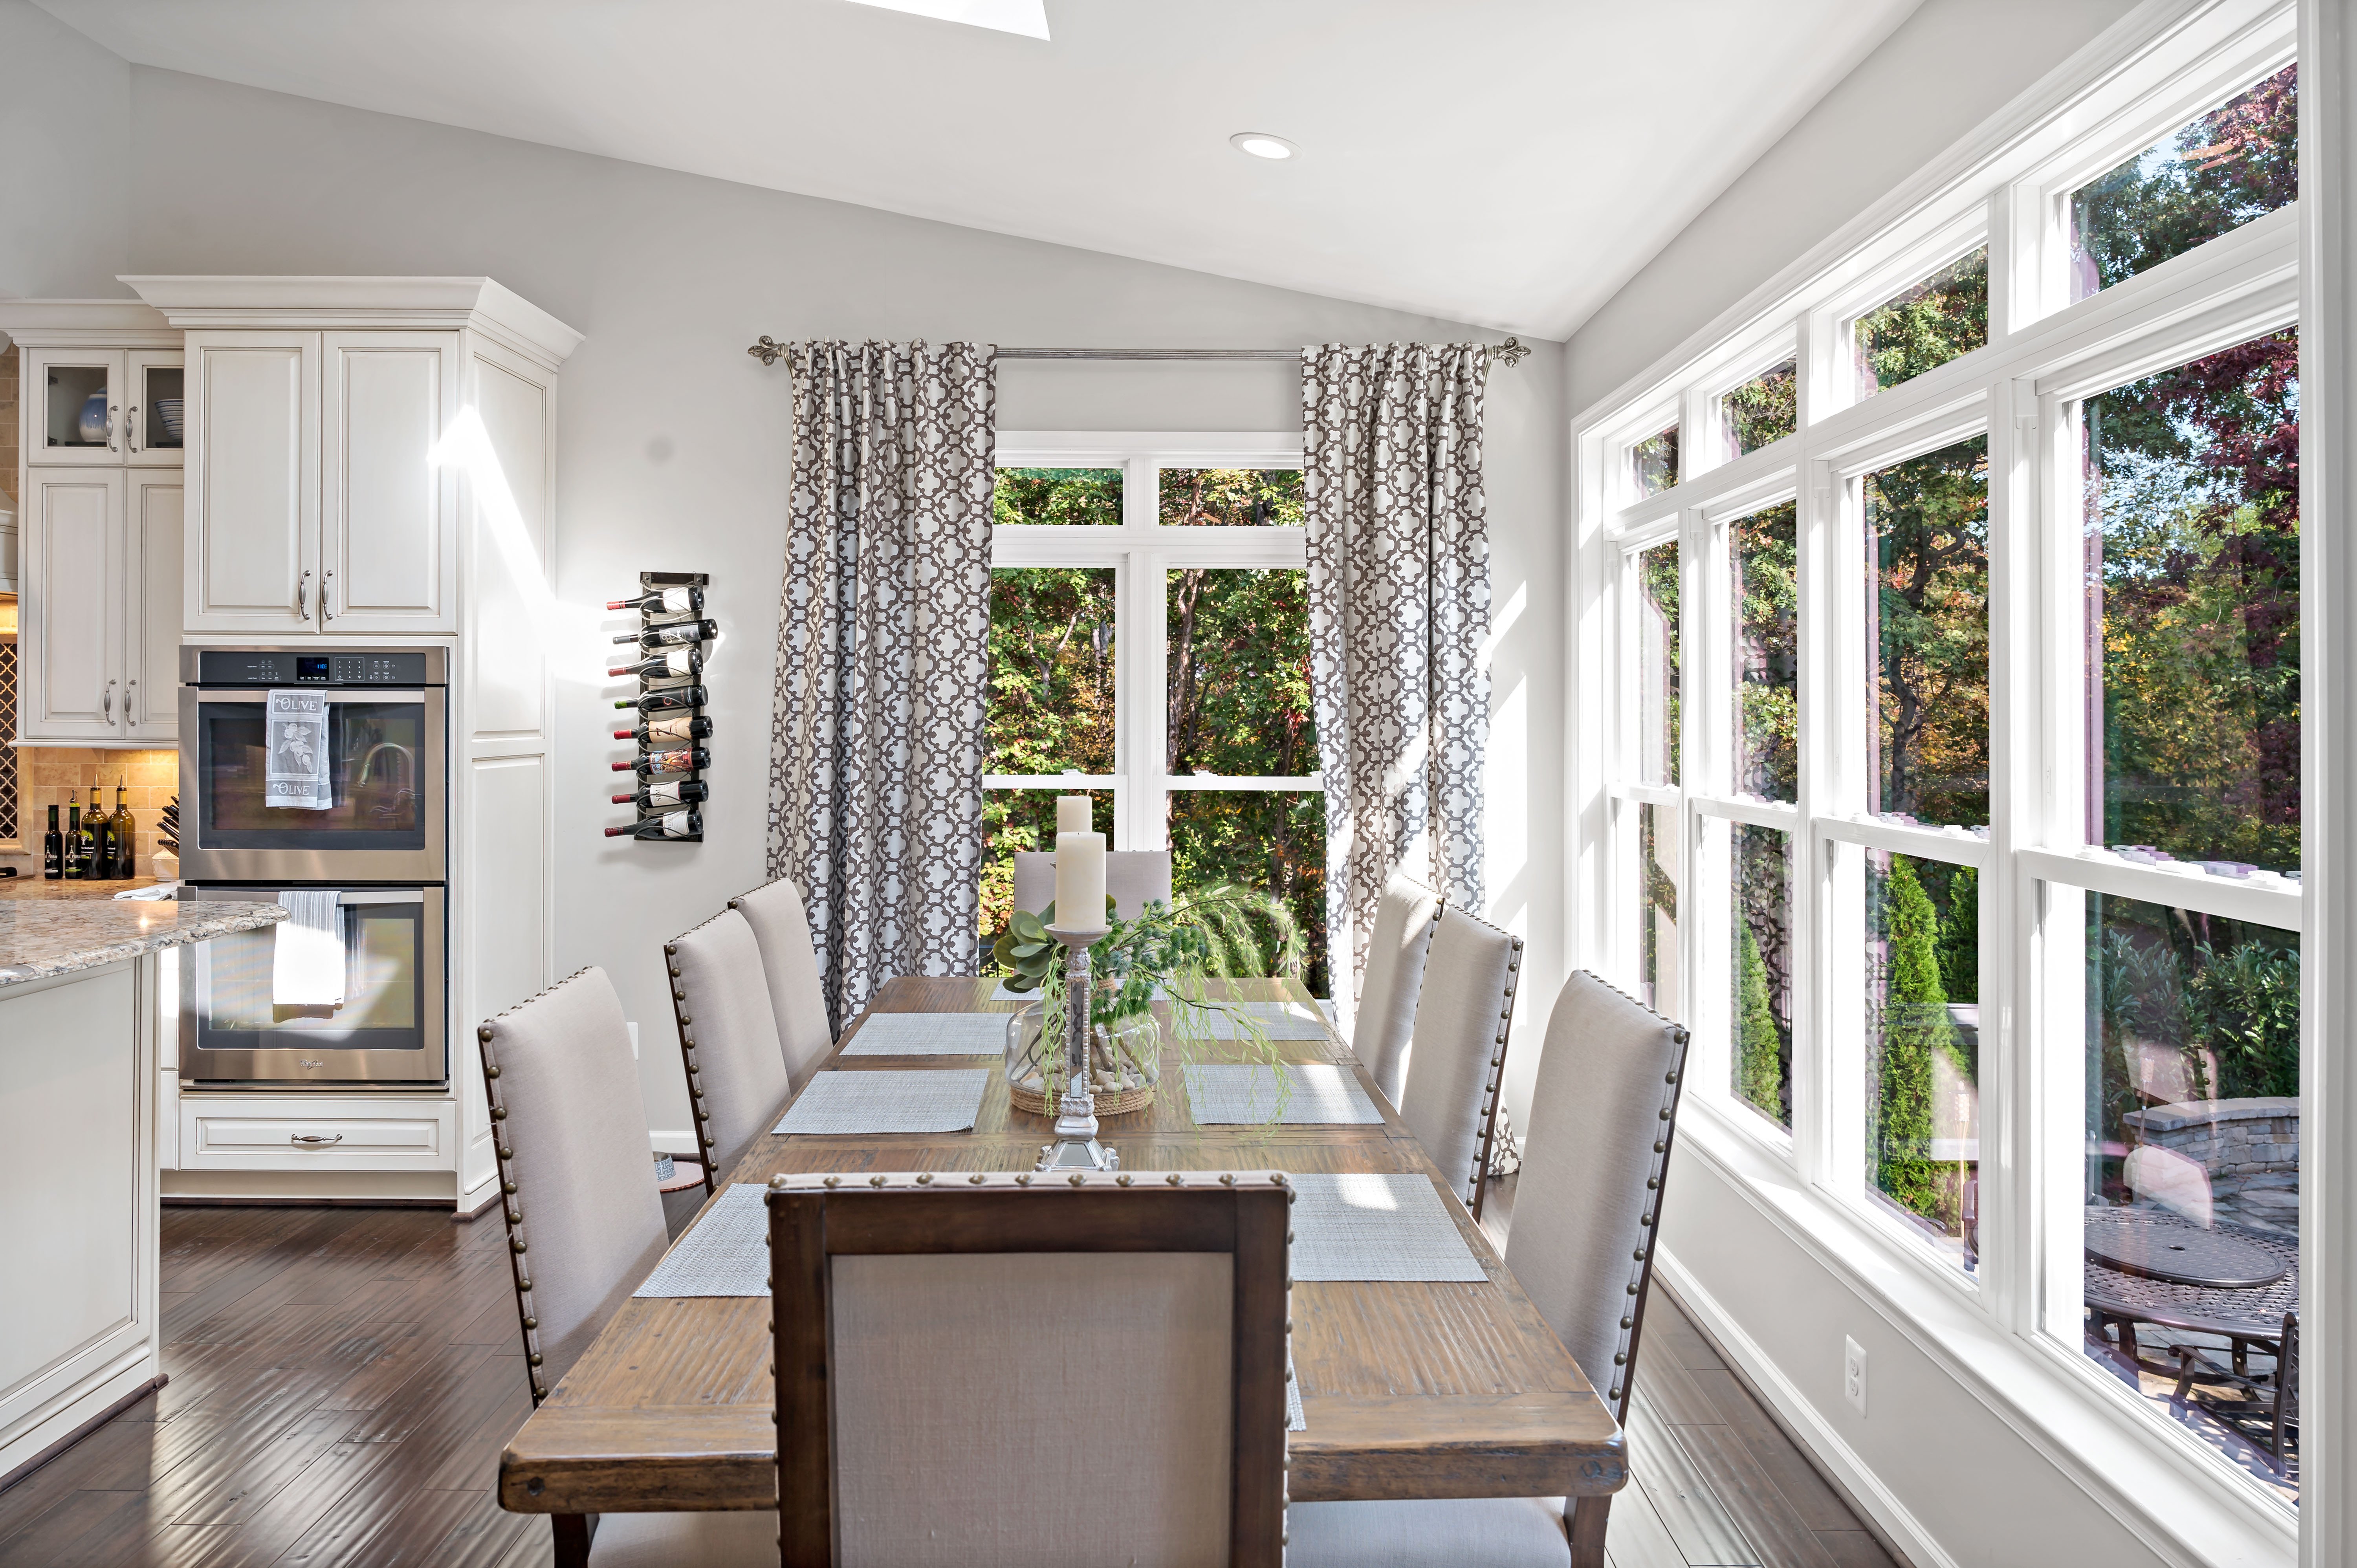 Dining room table with large windows and curtains overlooking backyard